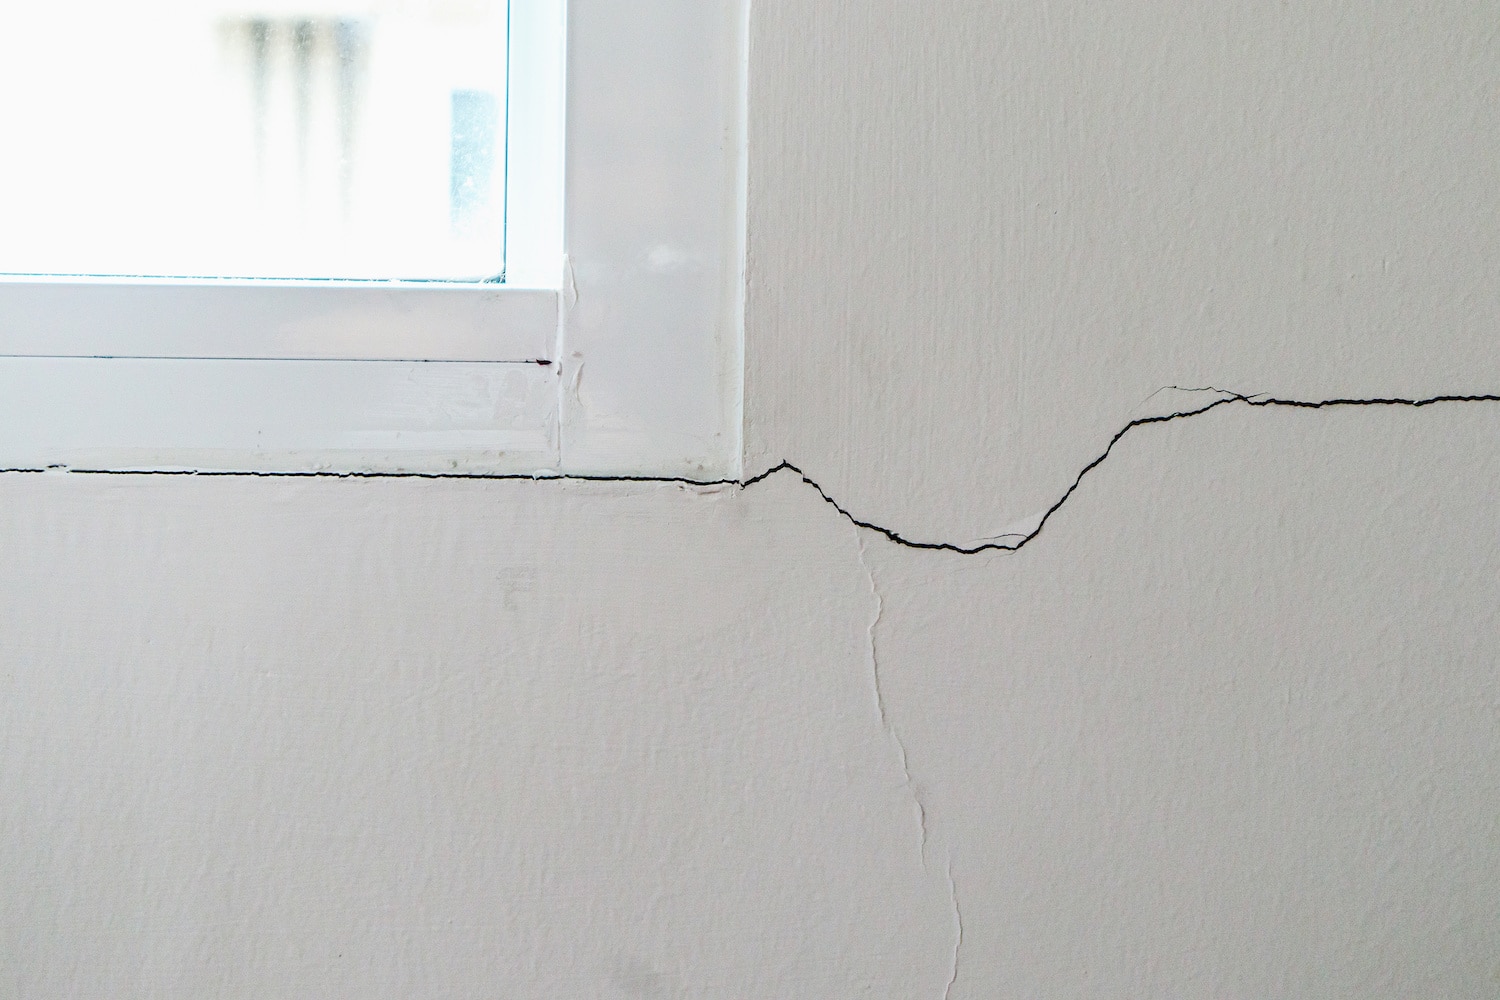 how to fix foundation problems yourself dealing with cracks